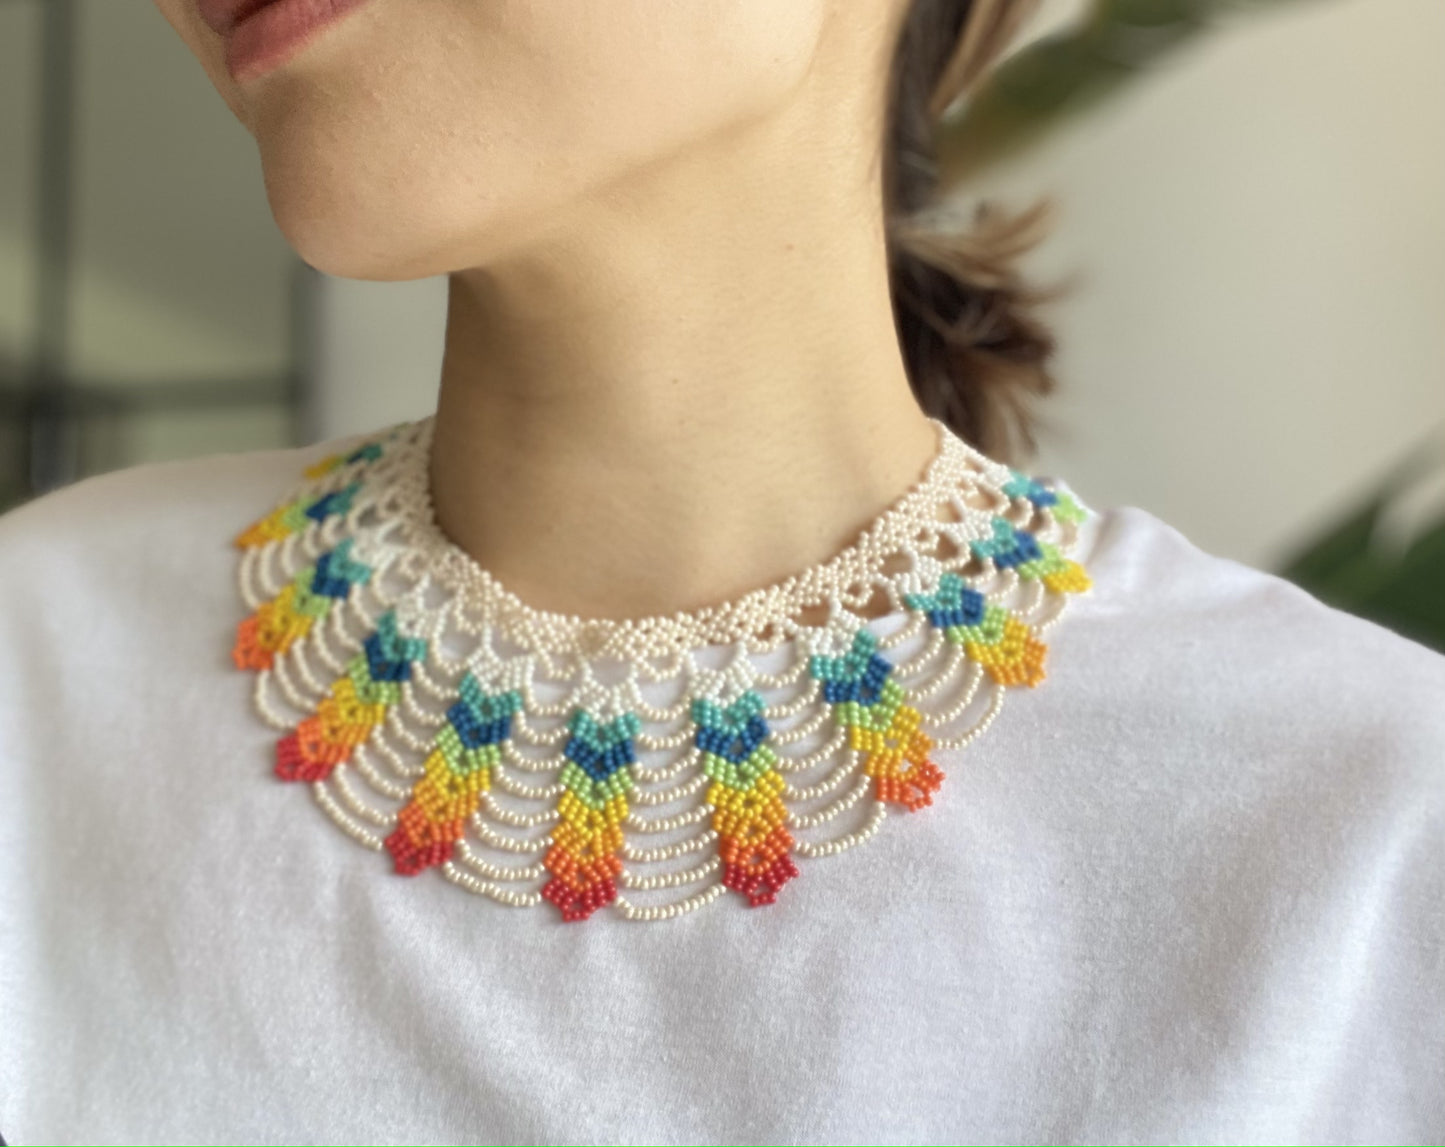 Enlace Beads Collar Necklace / Feather